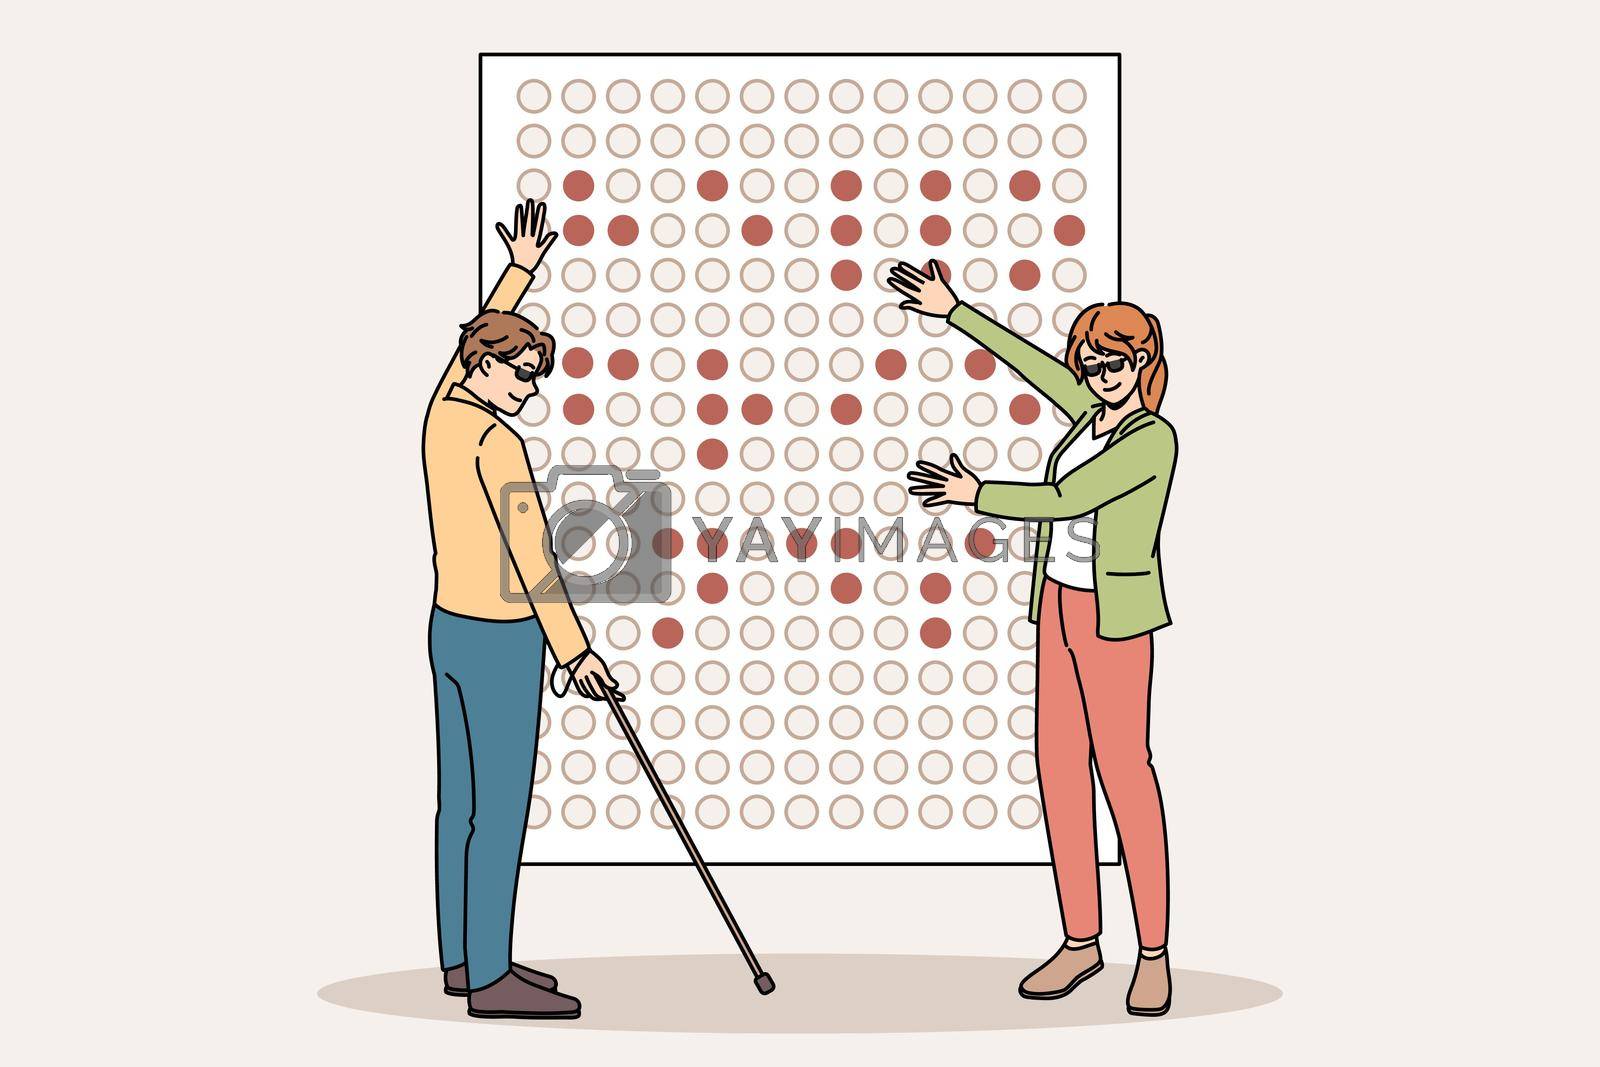 Blind people learn braille alphabet on board in school together. Disabled man and woman communicate read use symbols sign language. Equality and disability concept. Flat vector illustration.